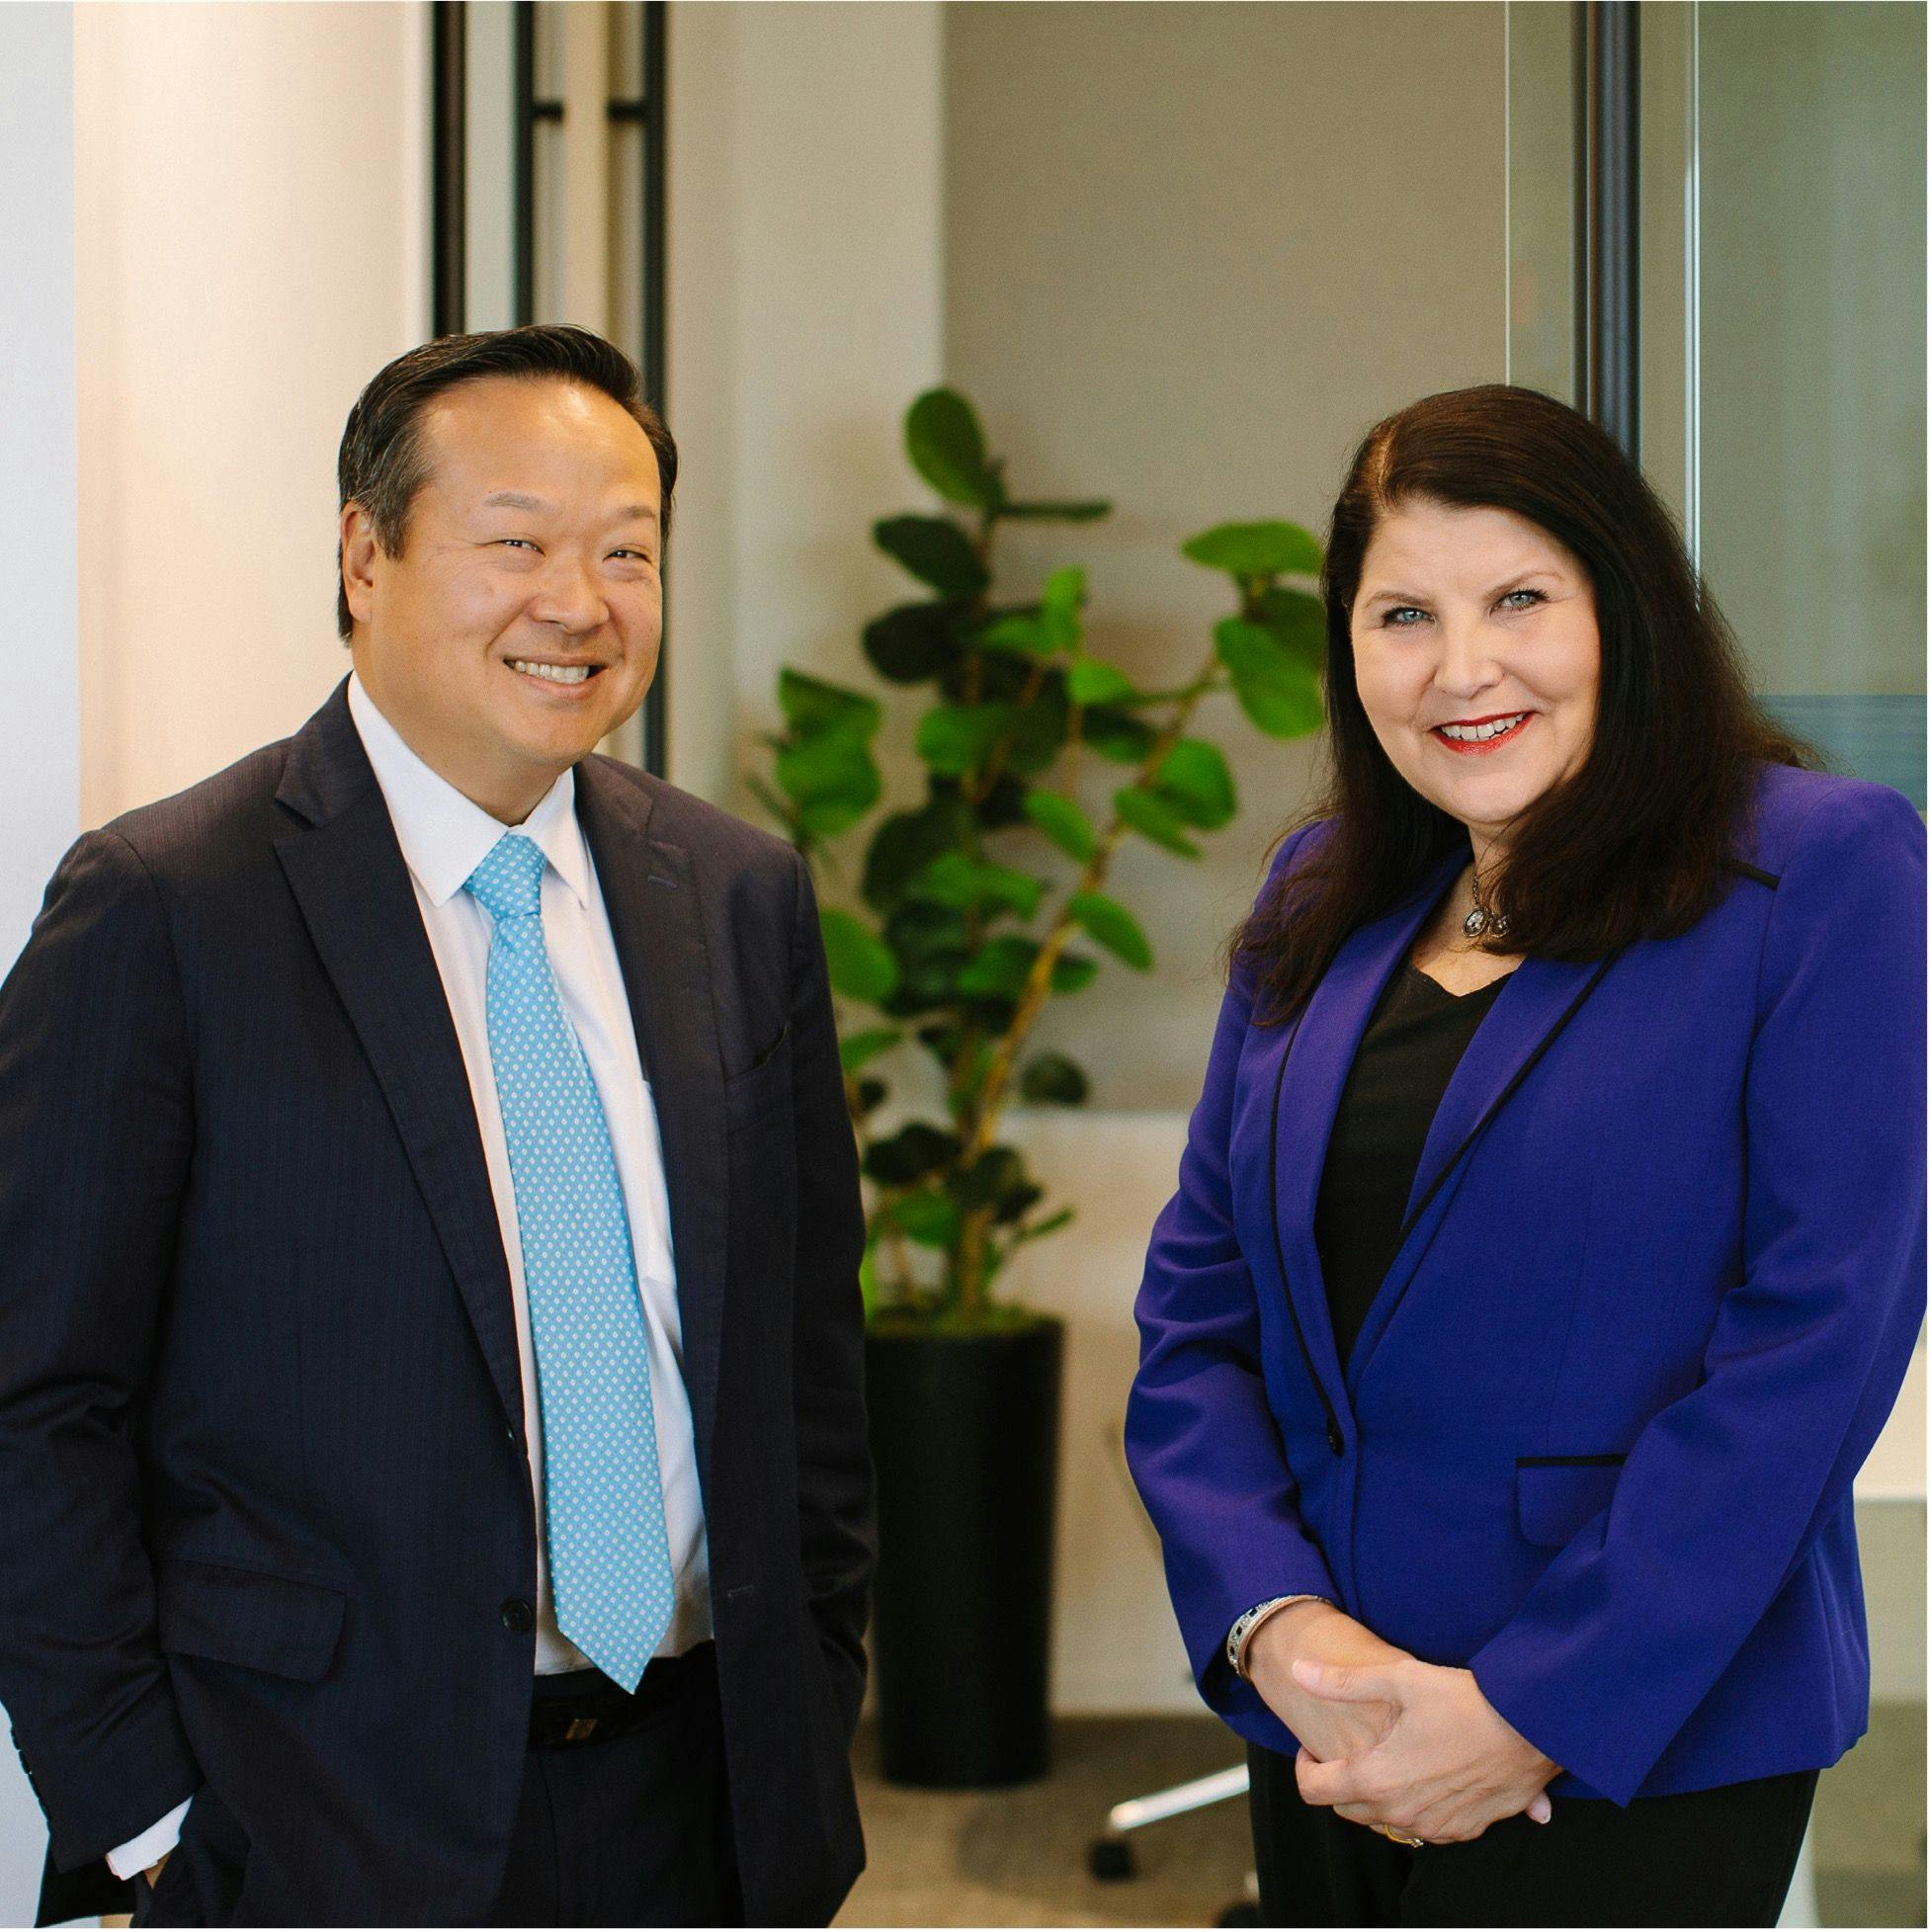 From left: DR. EDWARD S. KIM and
WENDY AUSTIN, M.S., RN, AOCN, COA, NEA-BC, FACHE

PHOTO BY NATALIE MOSER